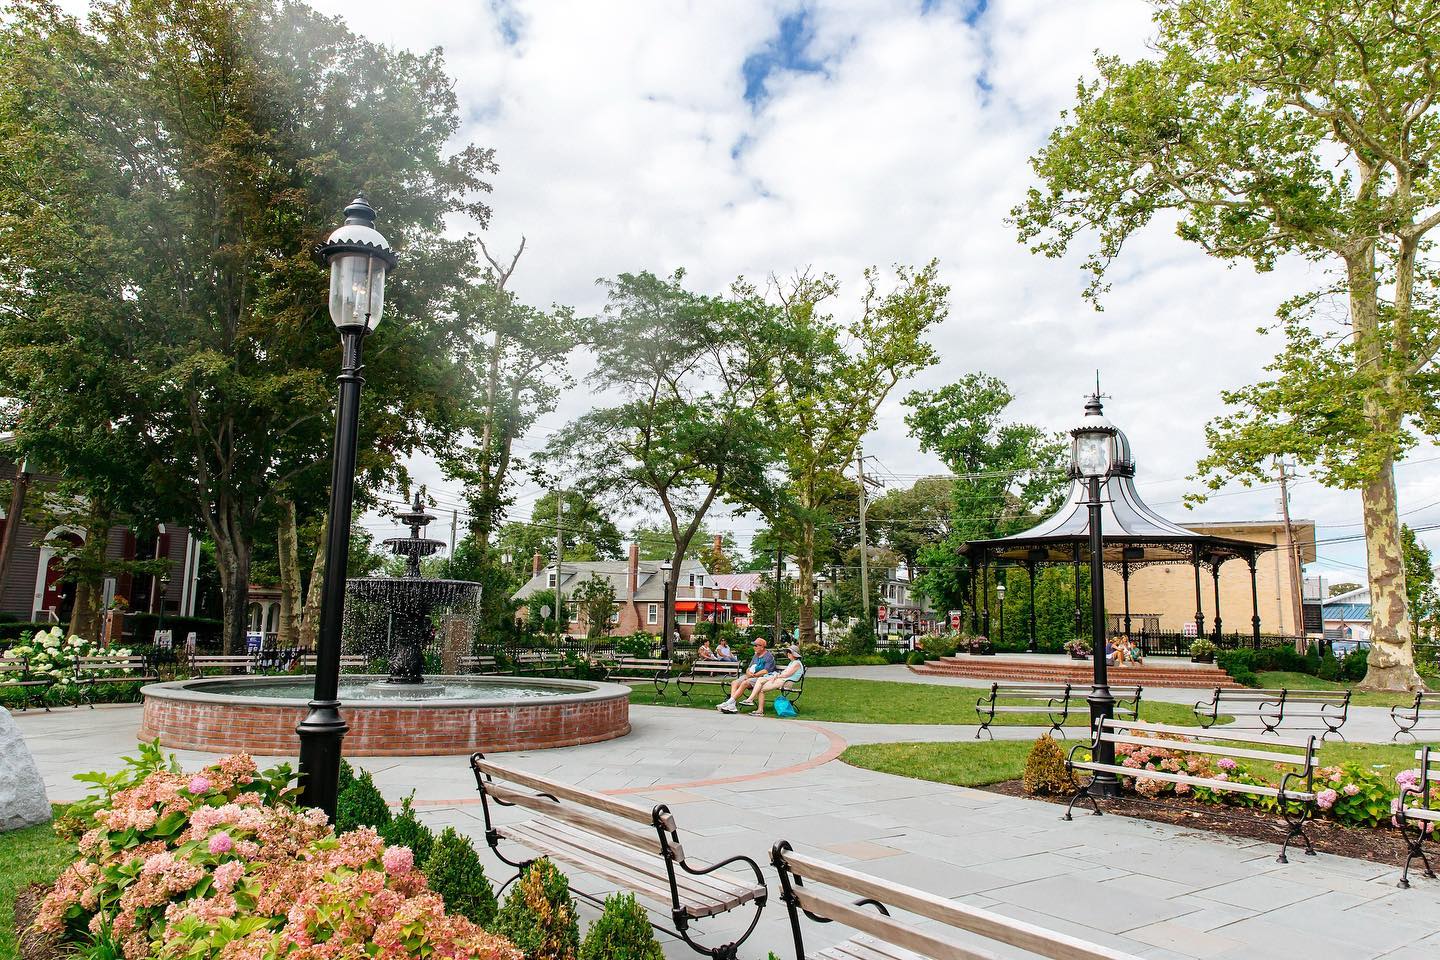 Casablanca offers walkability to the most charming corners of Cape May including dining shopping the theater and live music in the park